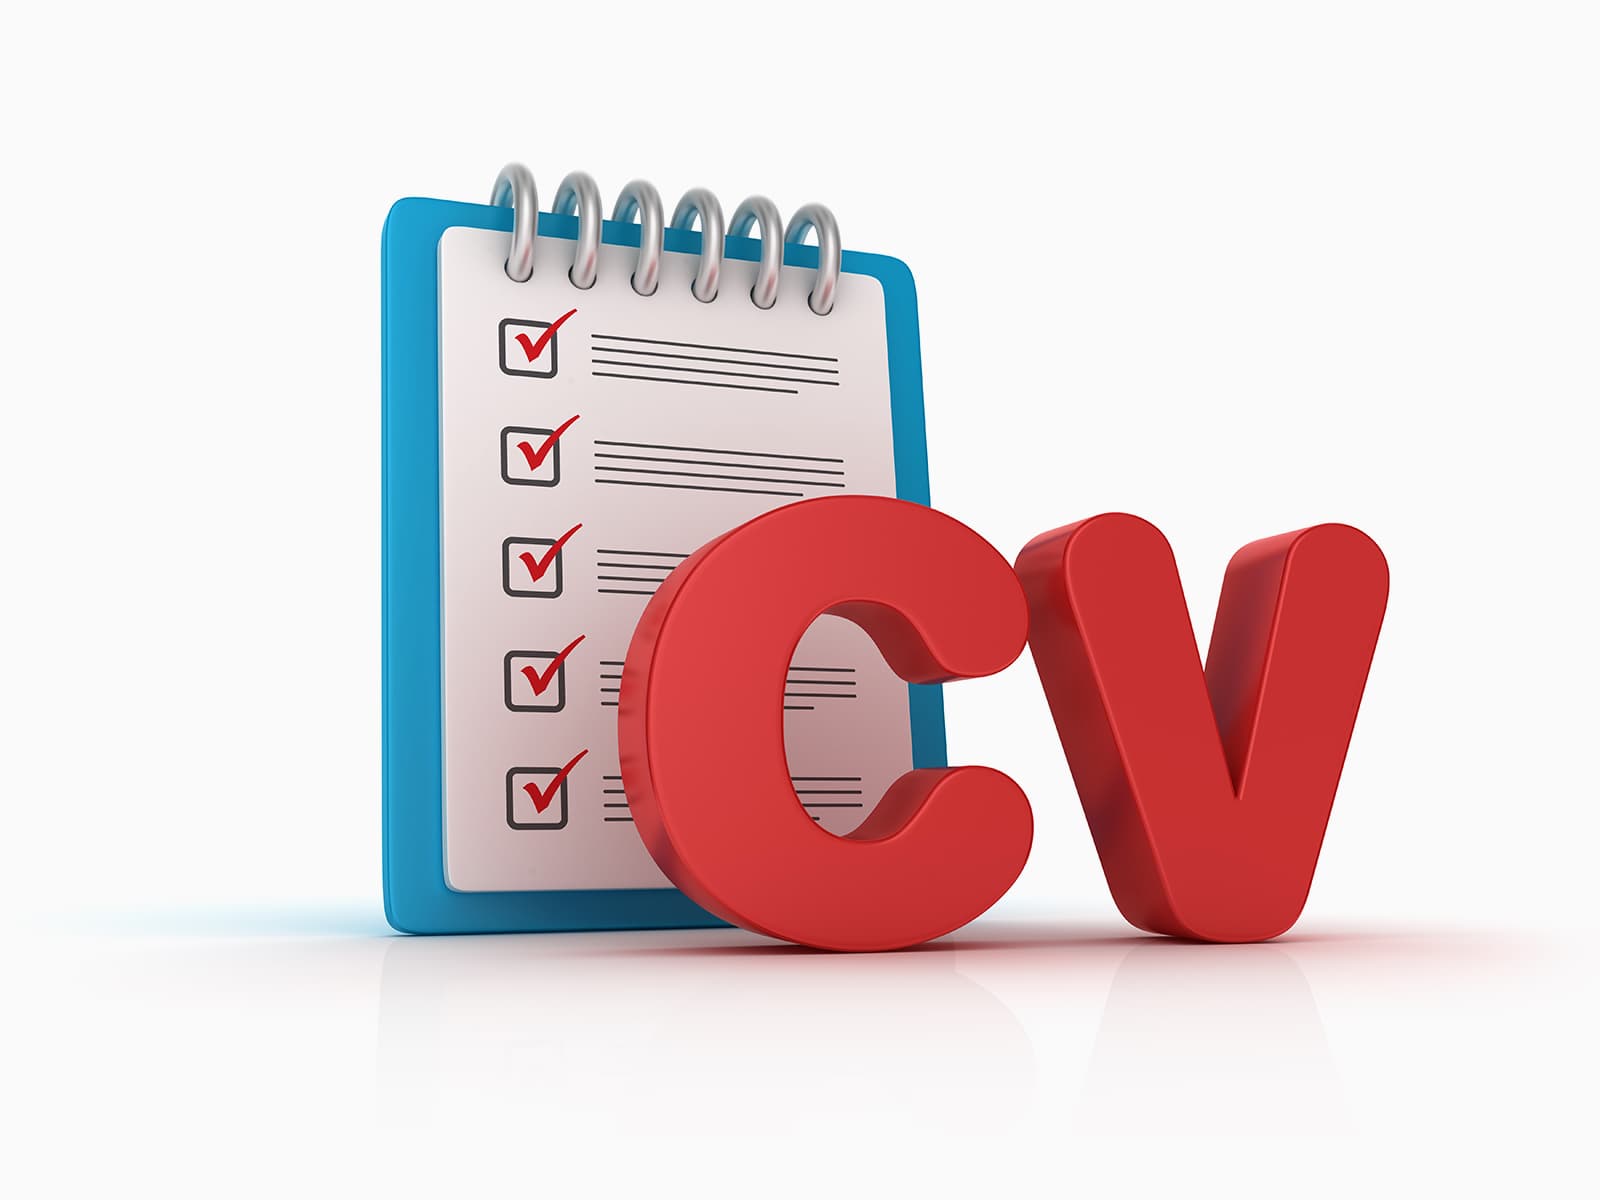 Our tried and tested CV methodology